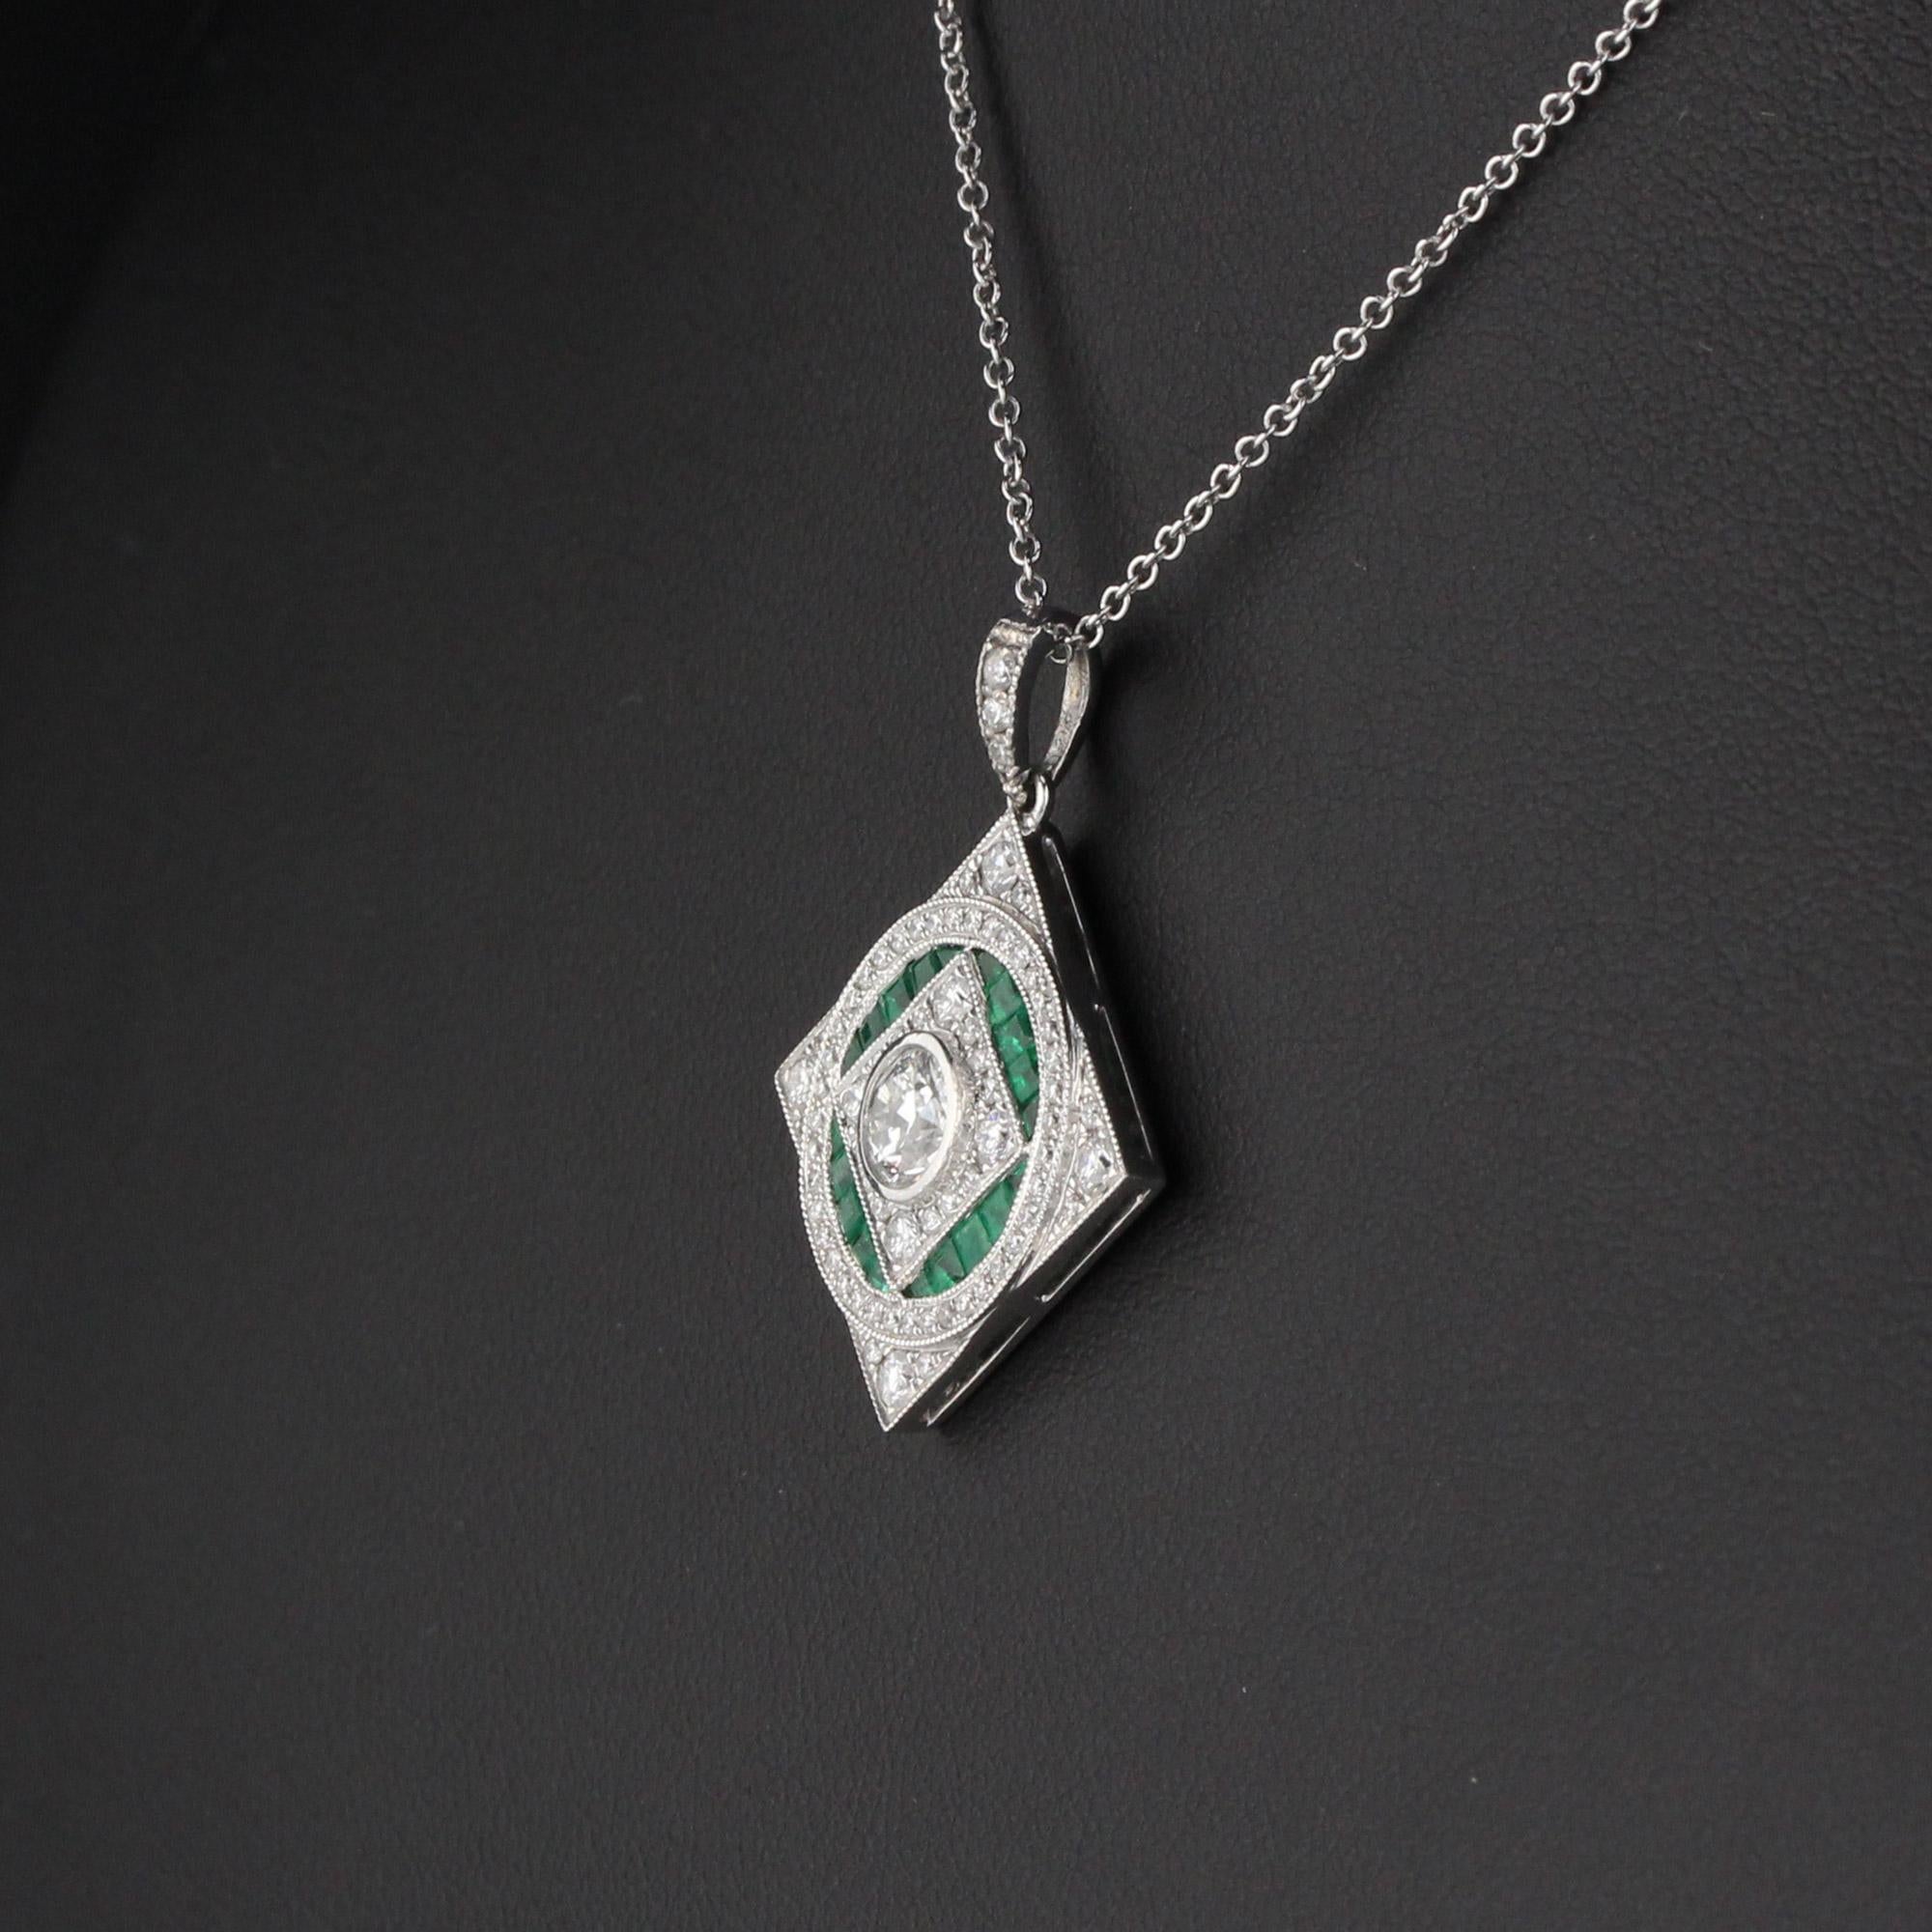 Vintage Estate 18 Karat White Gold Diamond and Emerald Pendant In Excellent Condition For Sale In Great Neck, NY